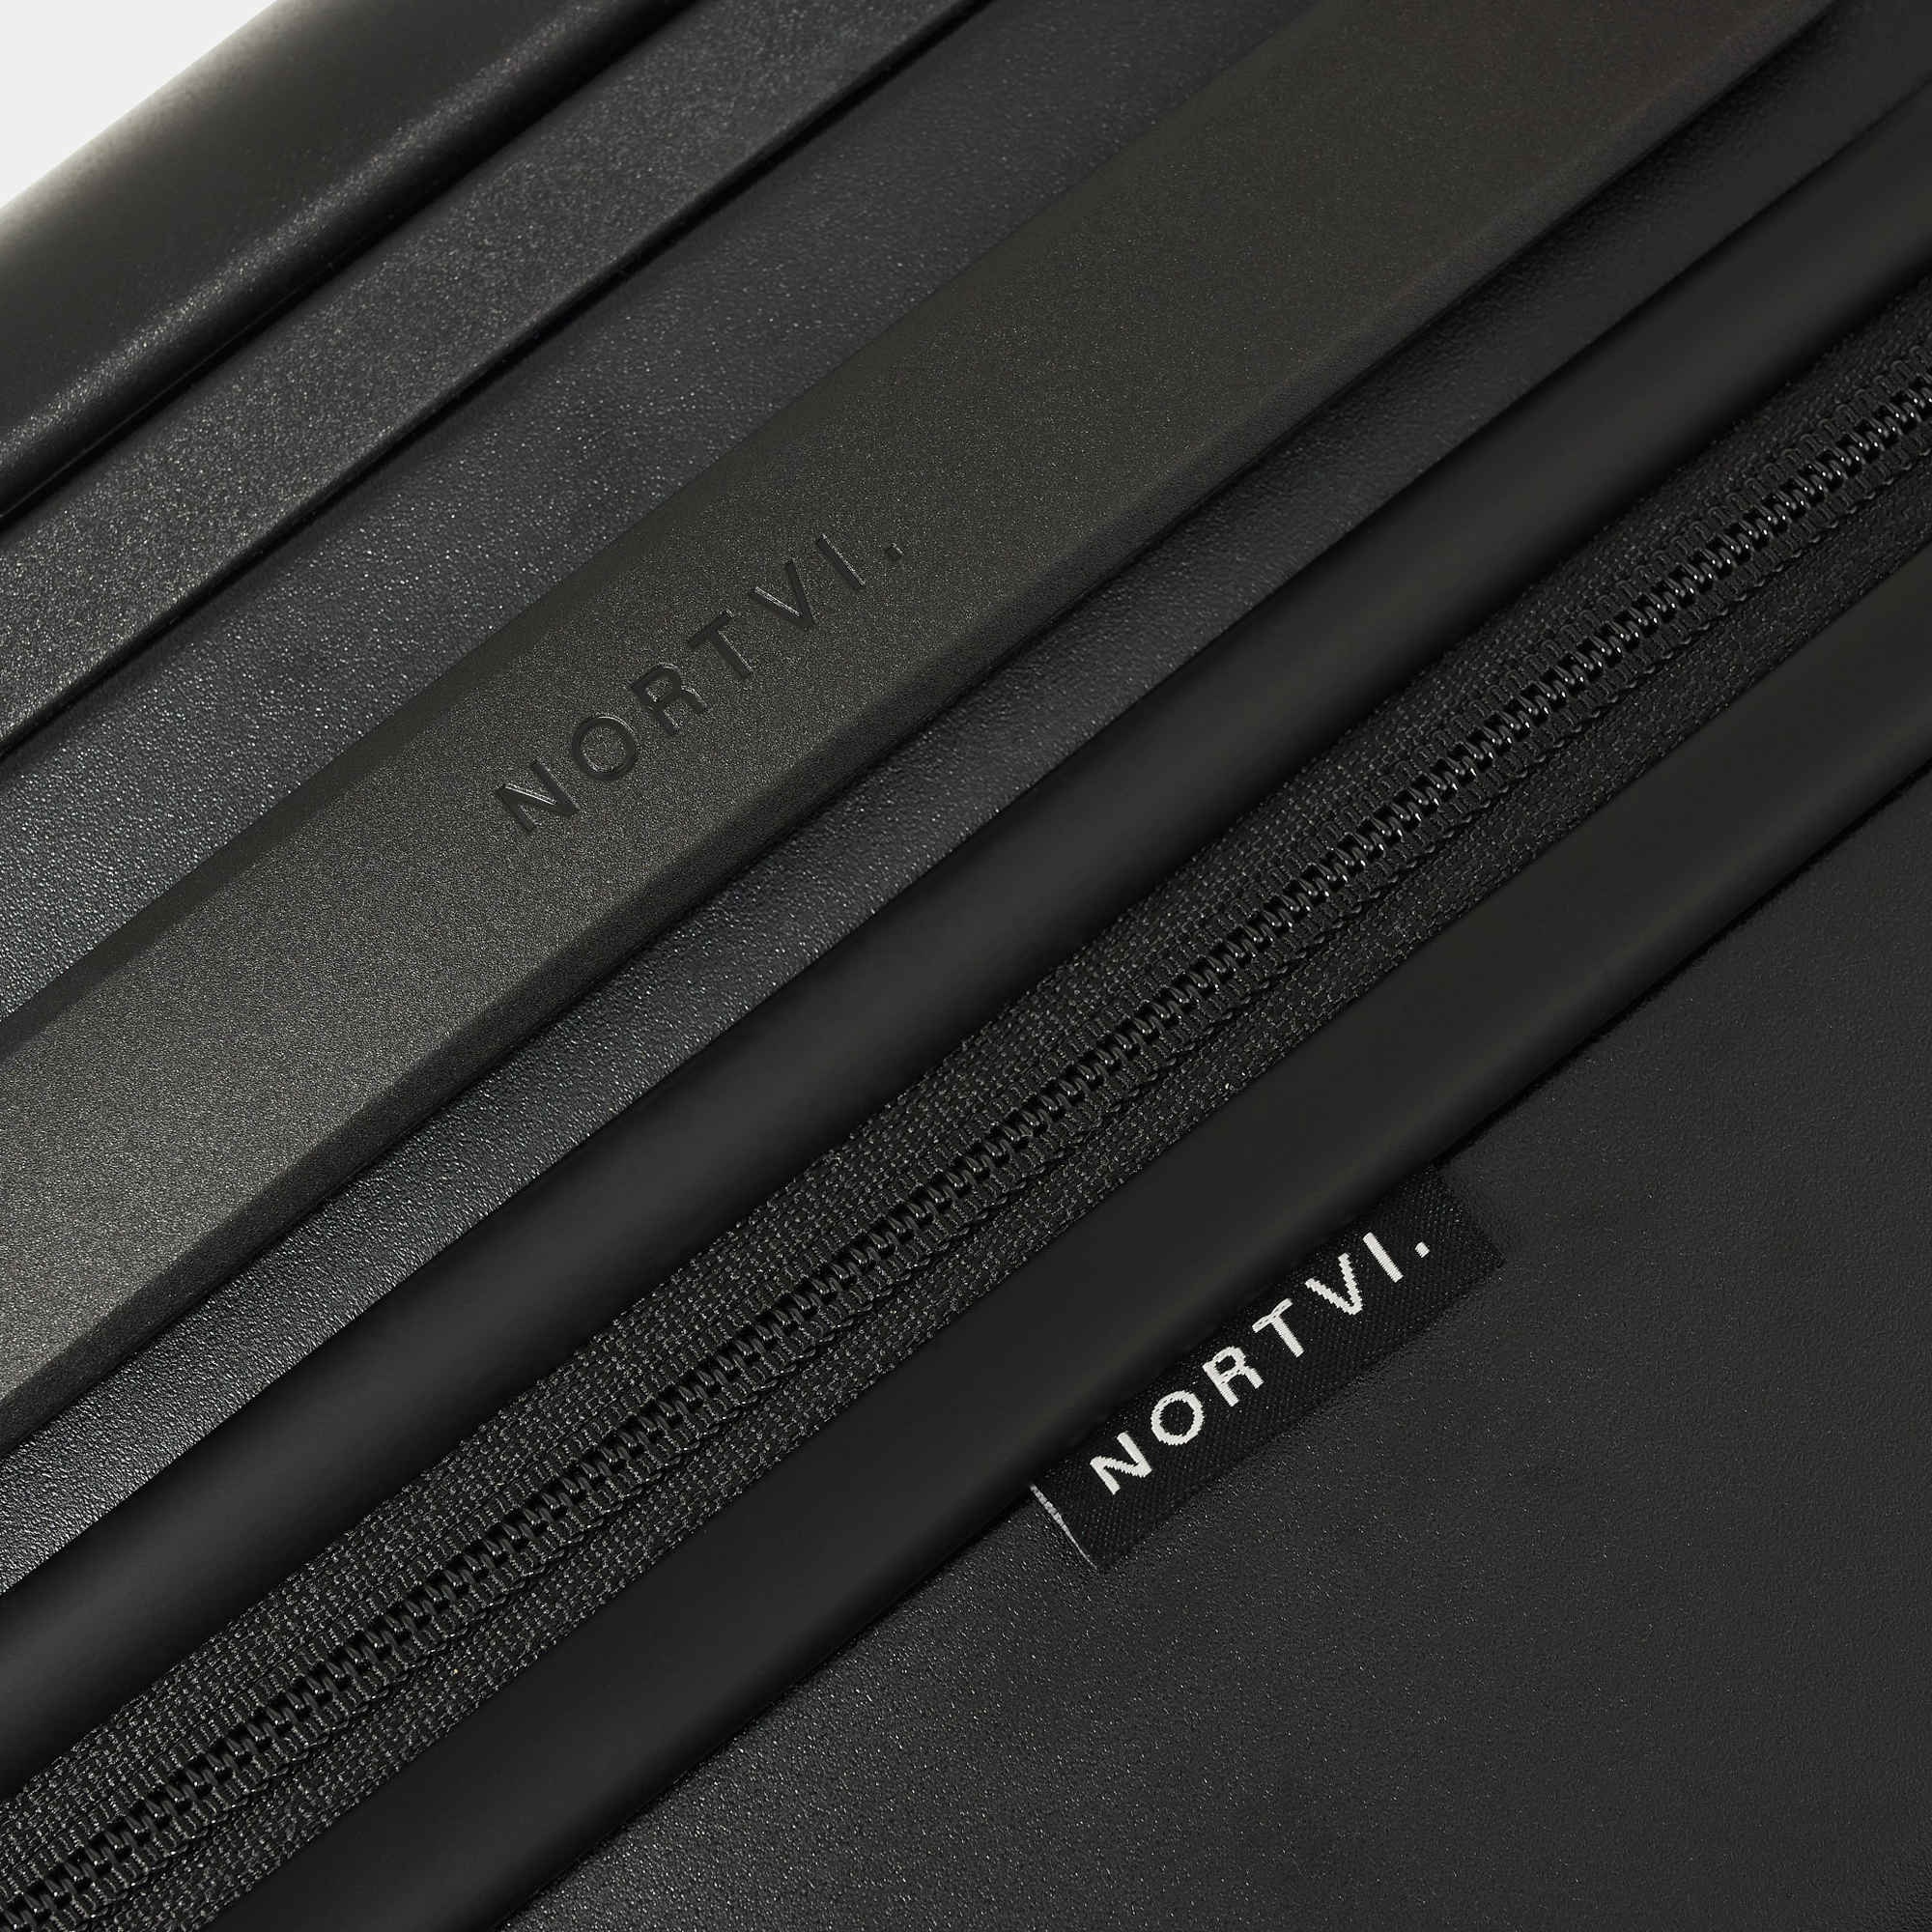 NORTVI sustainable design suitcase black made of durable material.